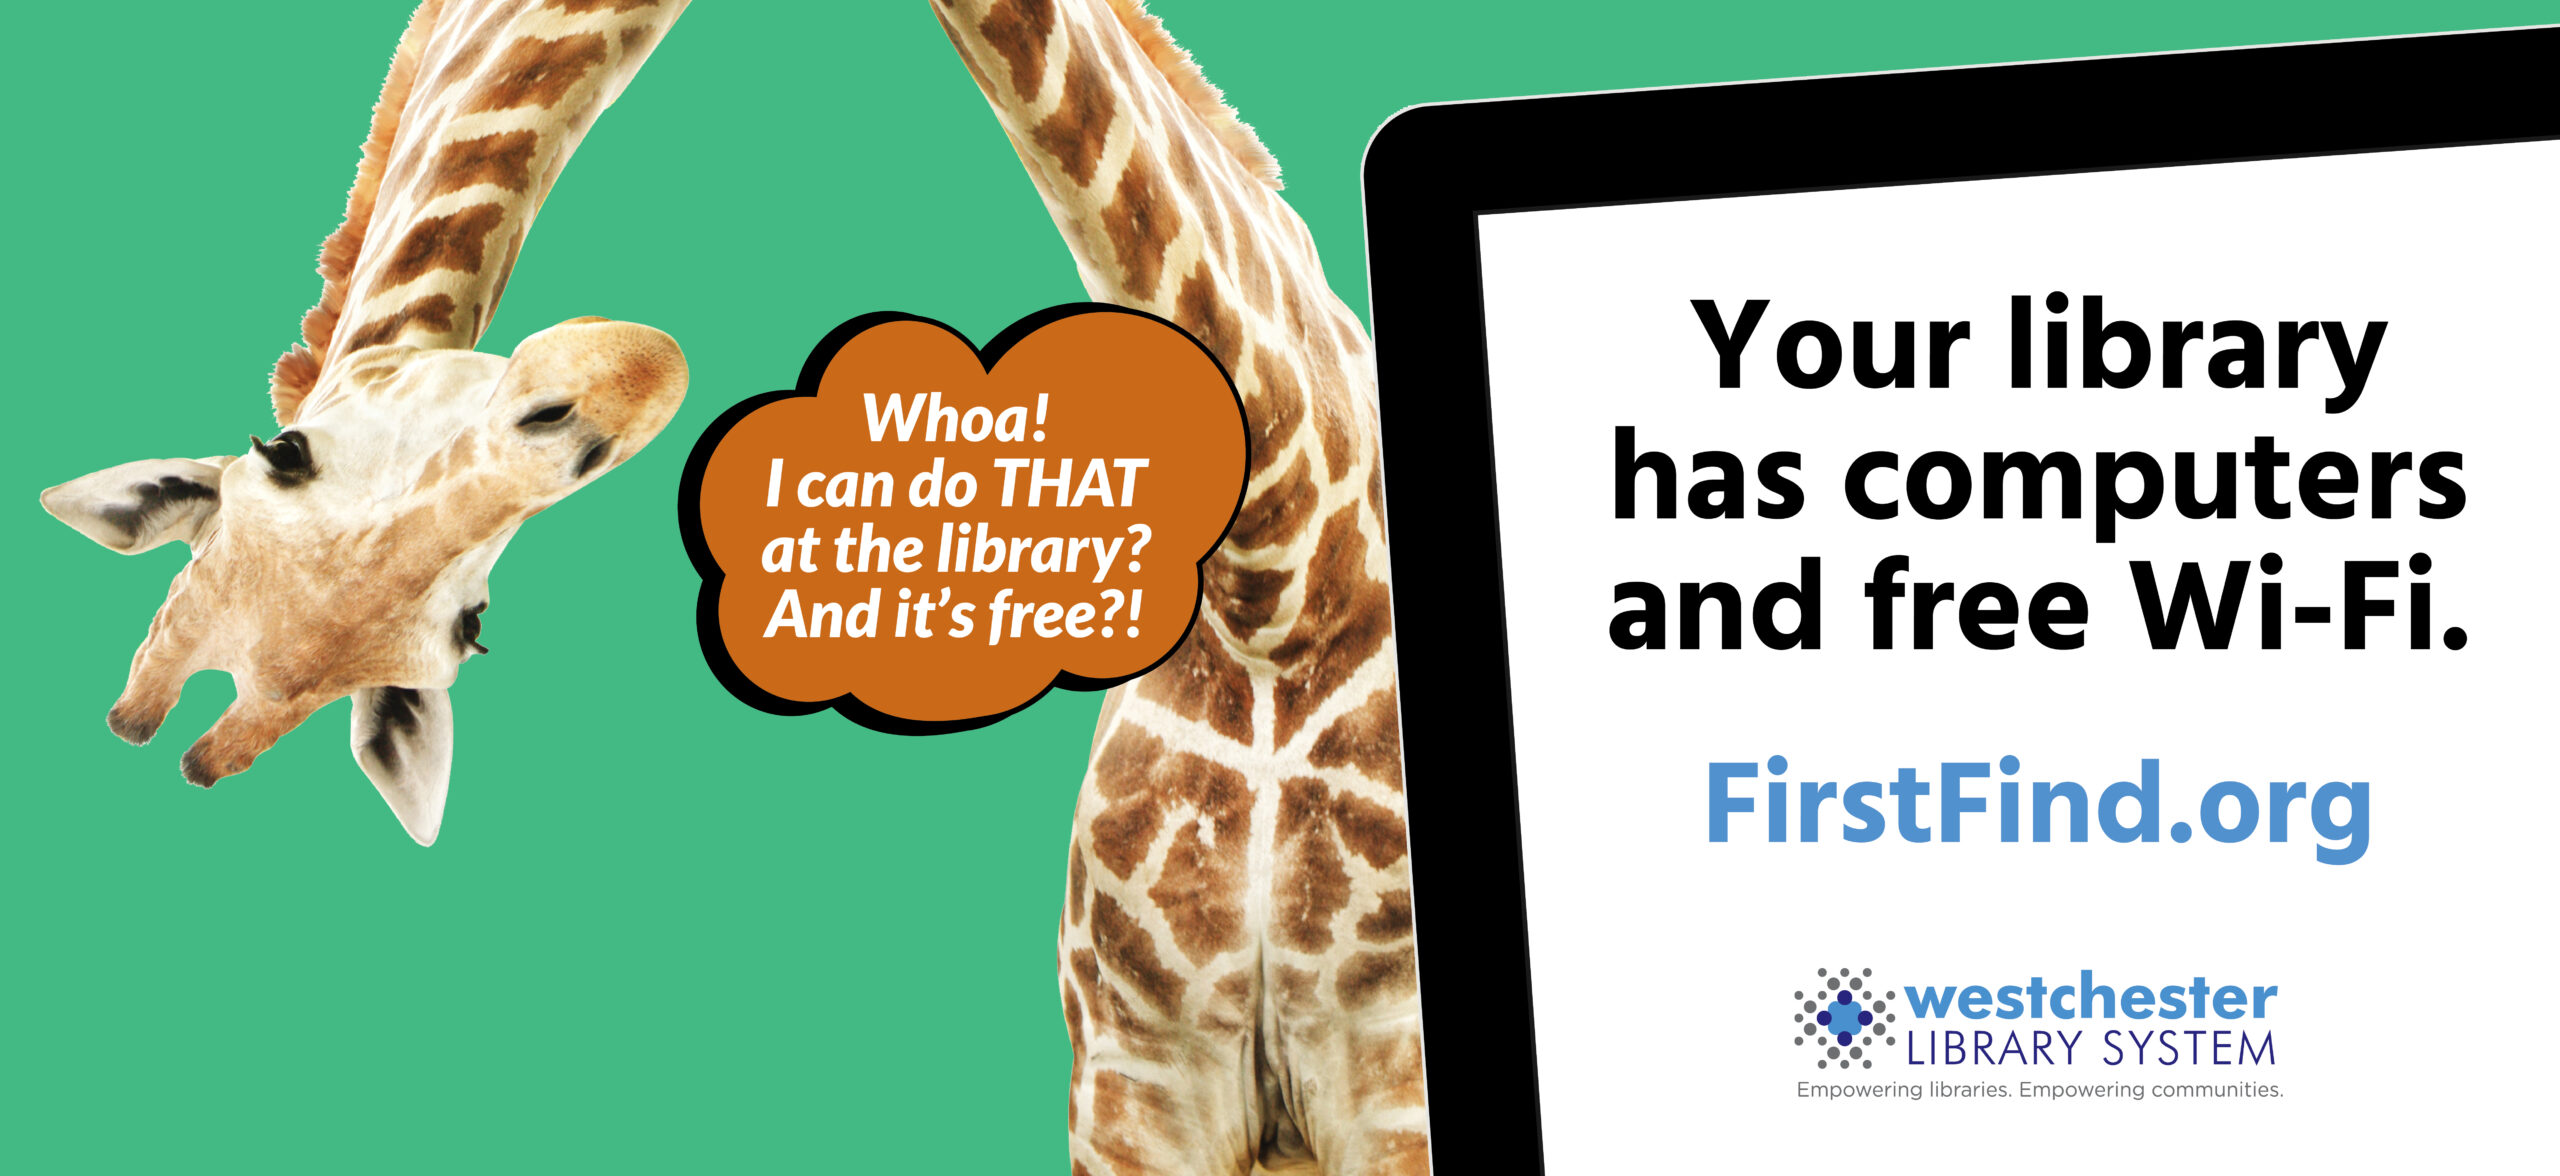 Billboard with giraffe letting you know computers and wifi are free at the library